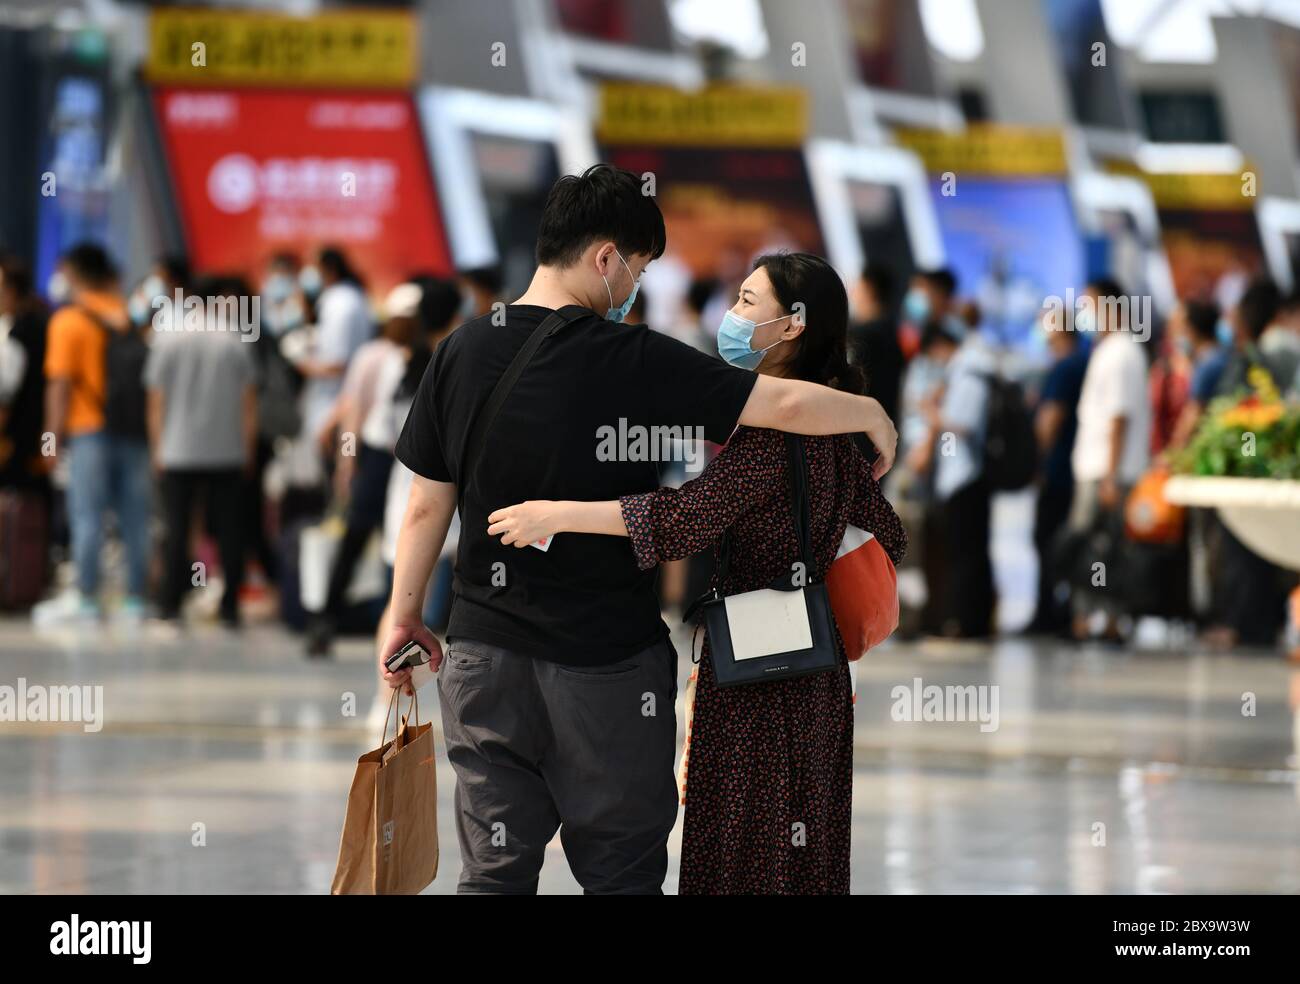 Tianjin. 6th June, 2020. Citizens say farewell to each other at the Tianjin west railway station in north China's Tianjin, June 6, 2020. According to the China State Railway Group Co., Ltd., the number of railway passenger trips in May reached 157 million, and an average of 5.08 million per day, up 37.6 percent from April. Credit: Li Ran/Xinhua/Alamy Live News Stock Photo